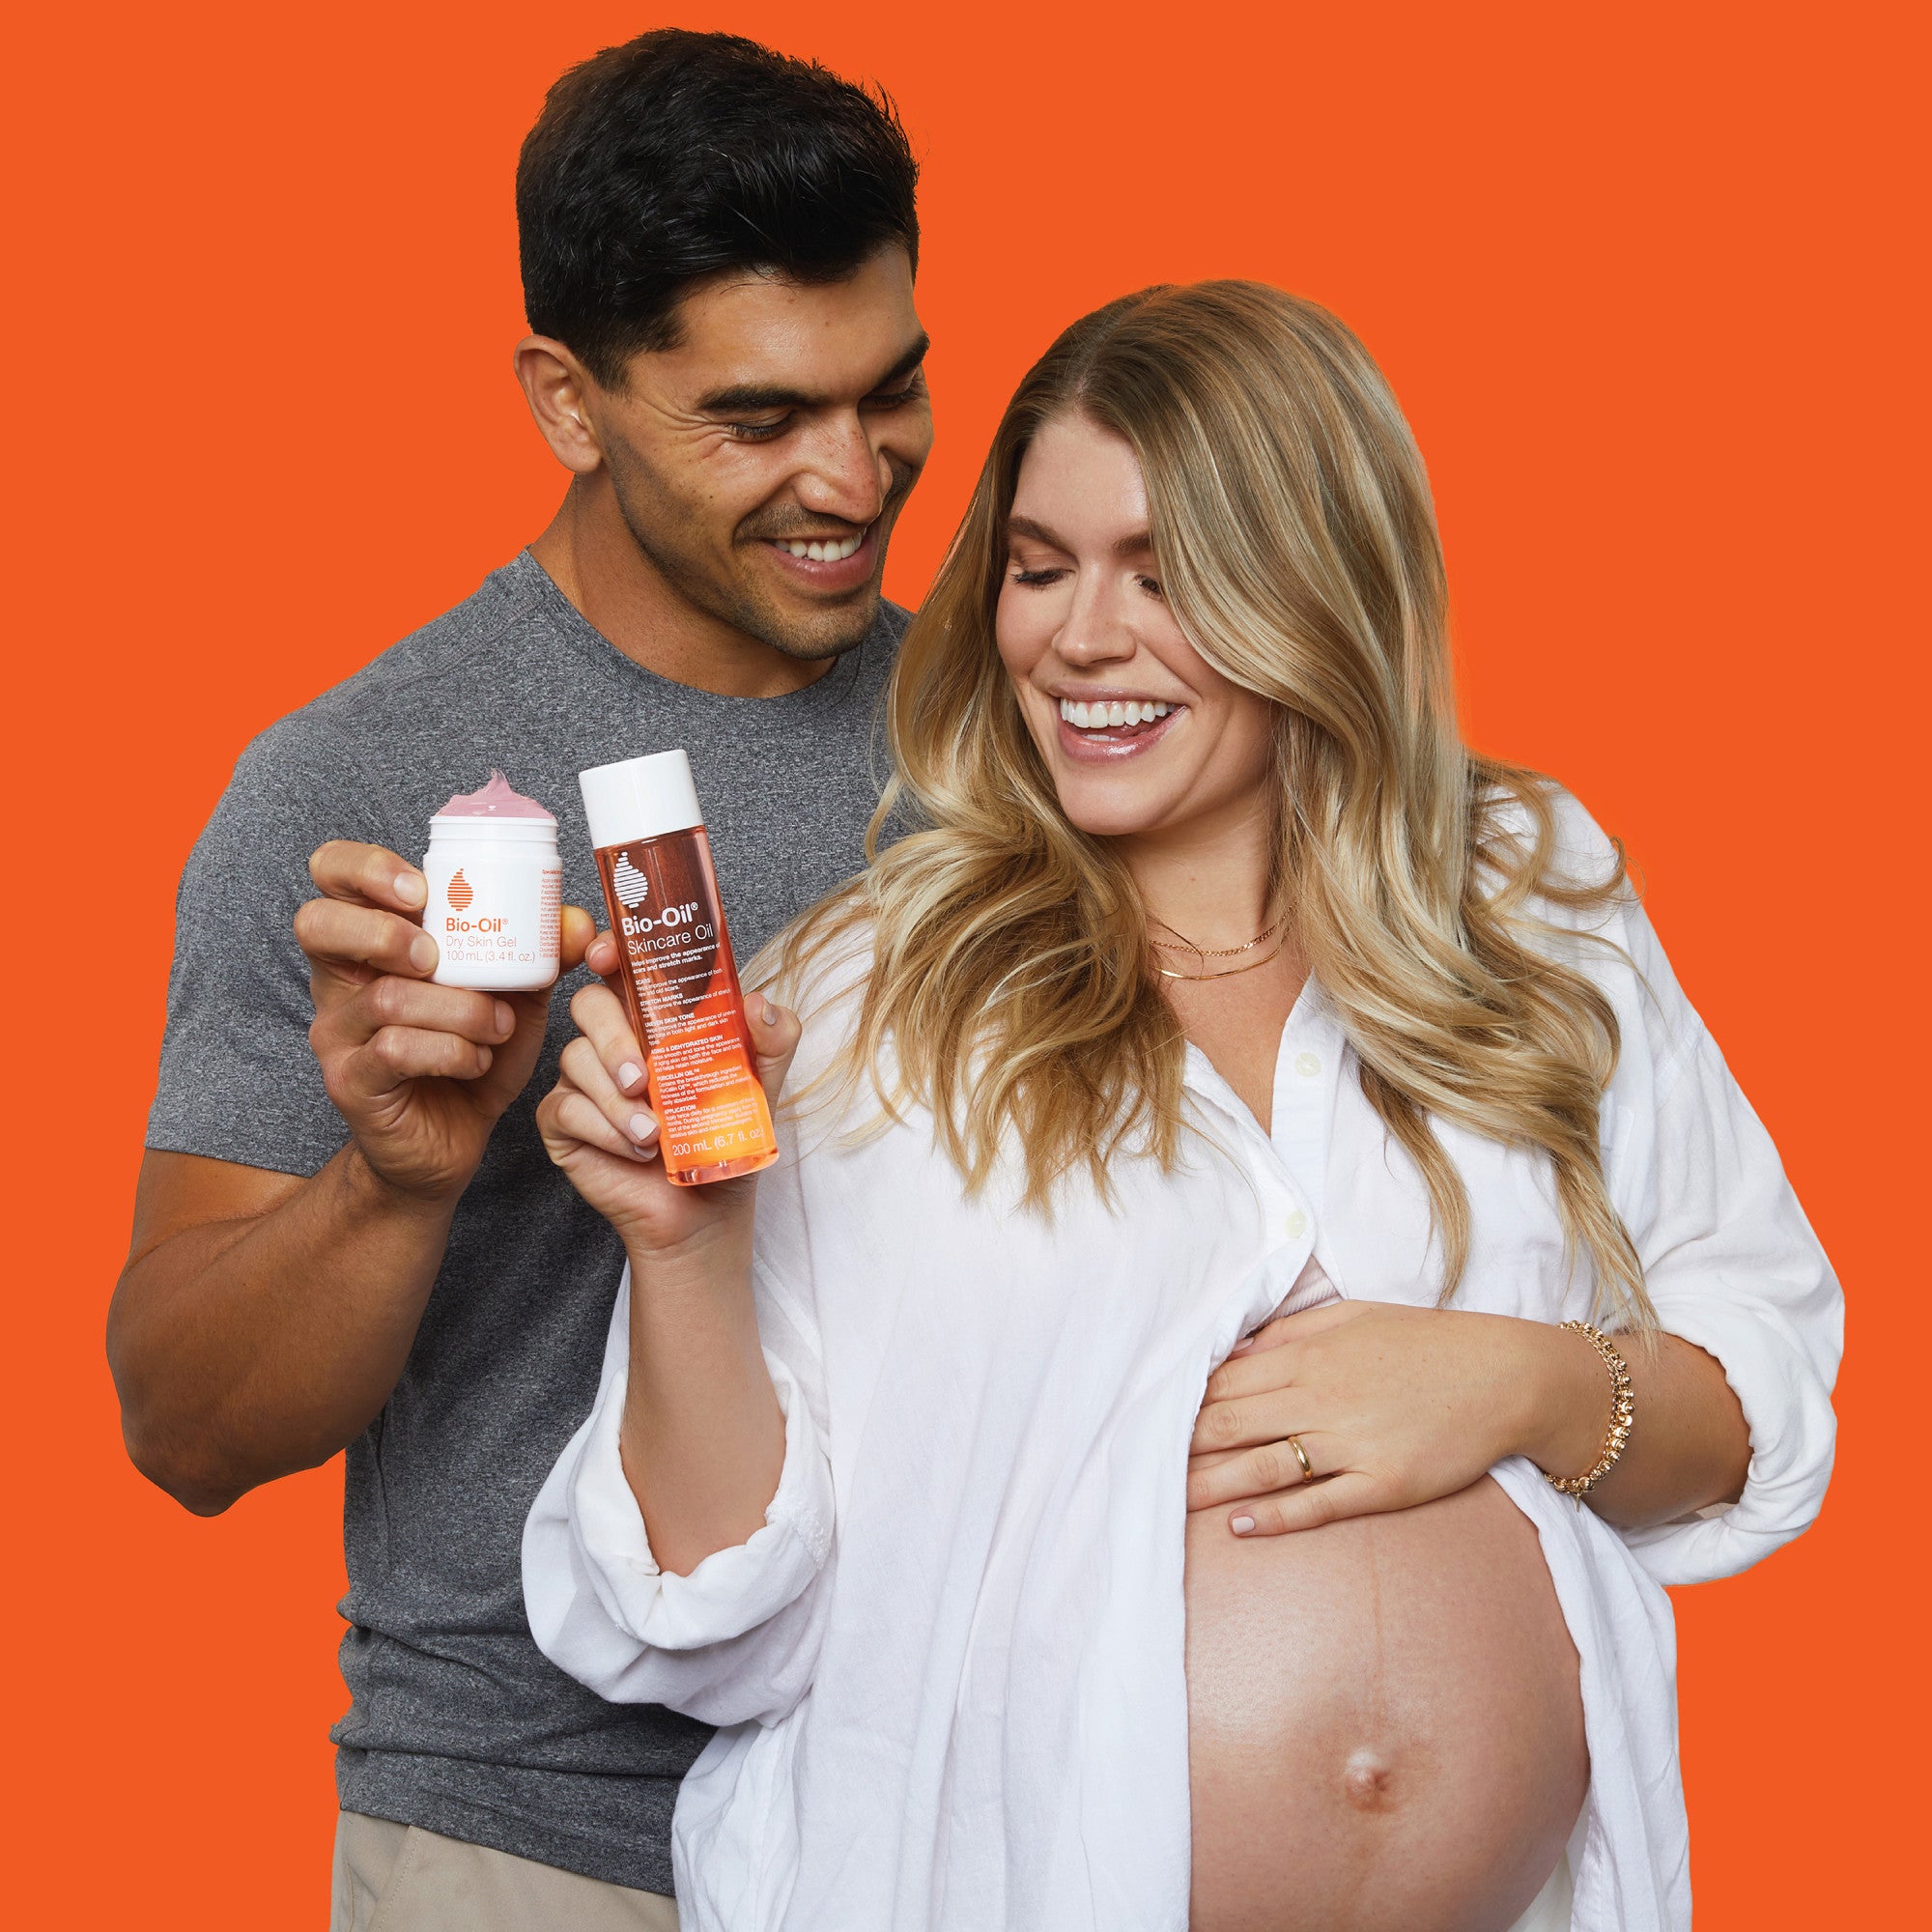 A pregnant woman is holding a bottle of Bio-Oil Skincare Oil.